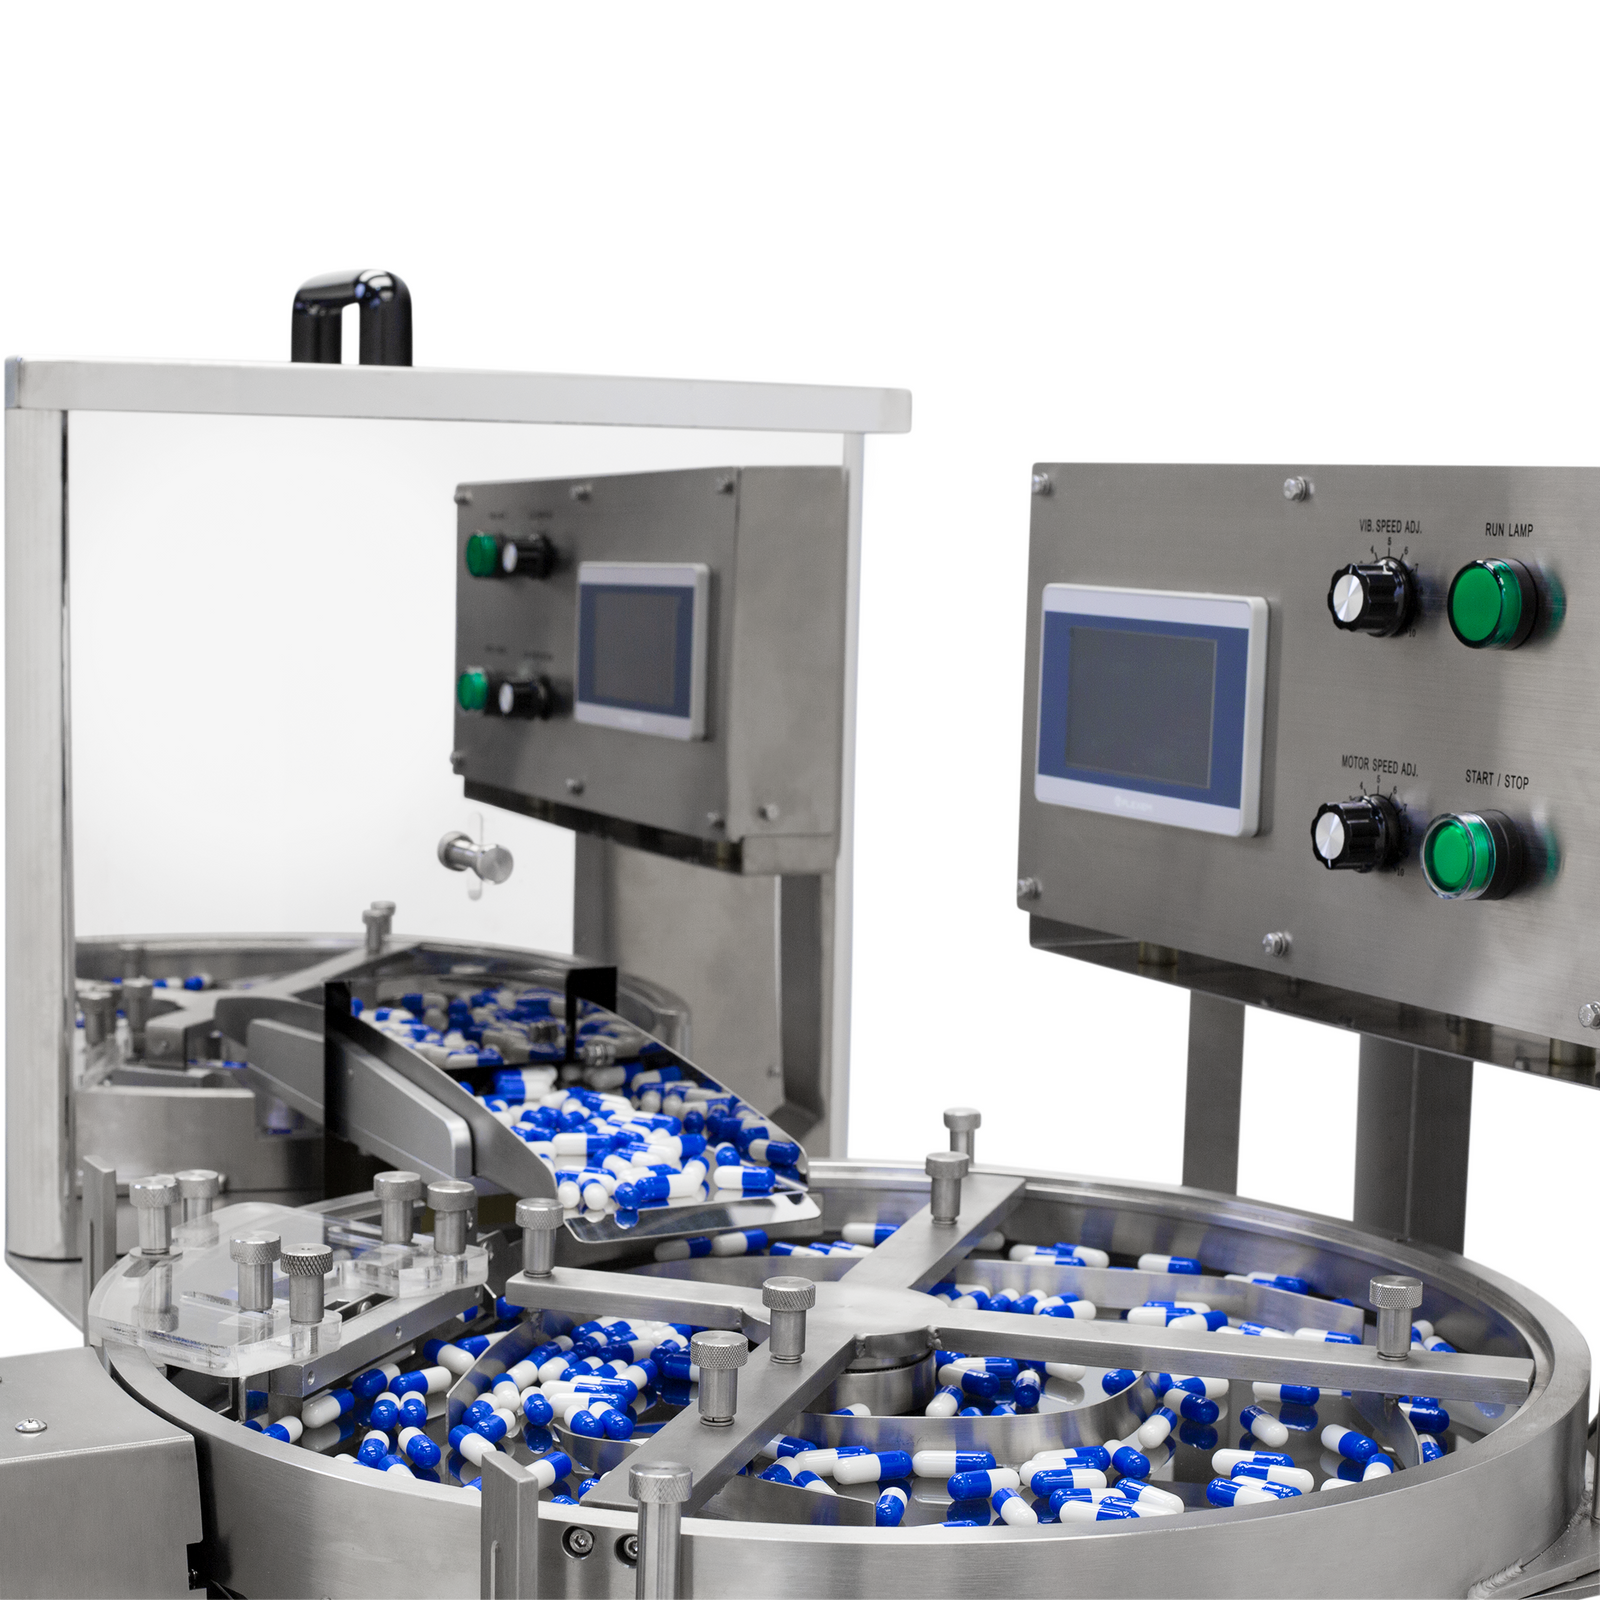 Shows how pills are distributed in the JORES TECHNOLOGIES® pill counter while operating.